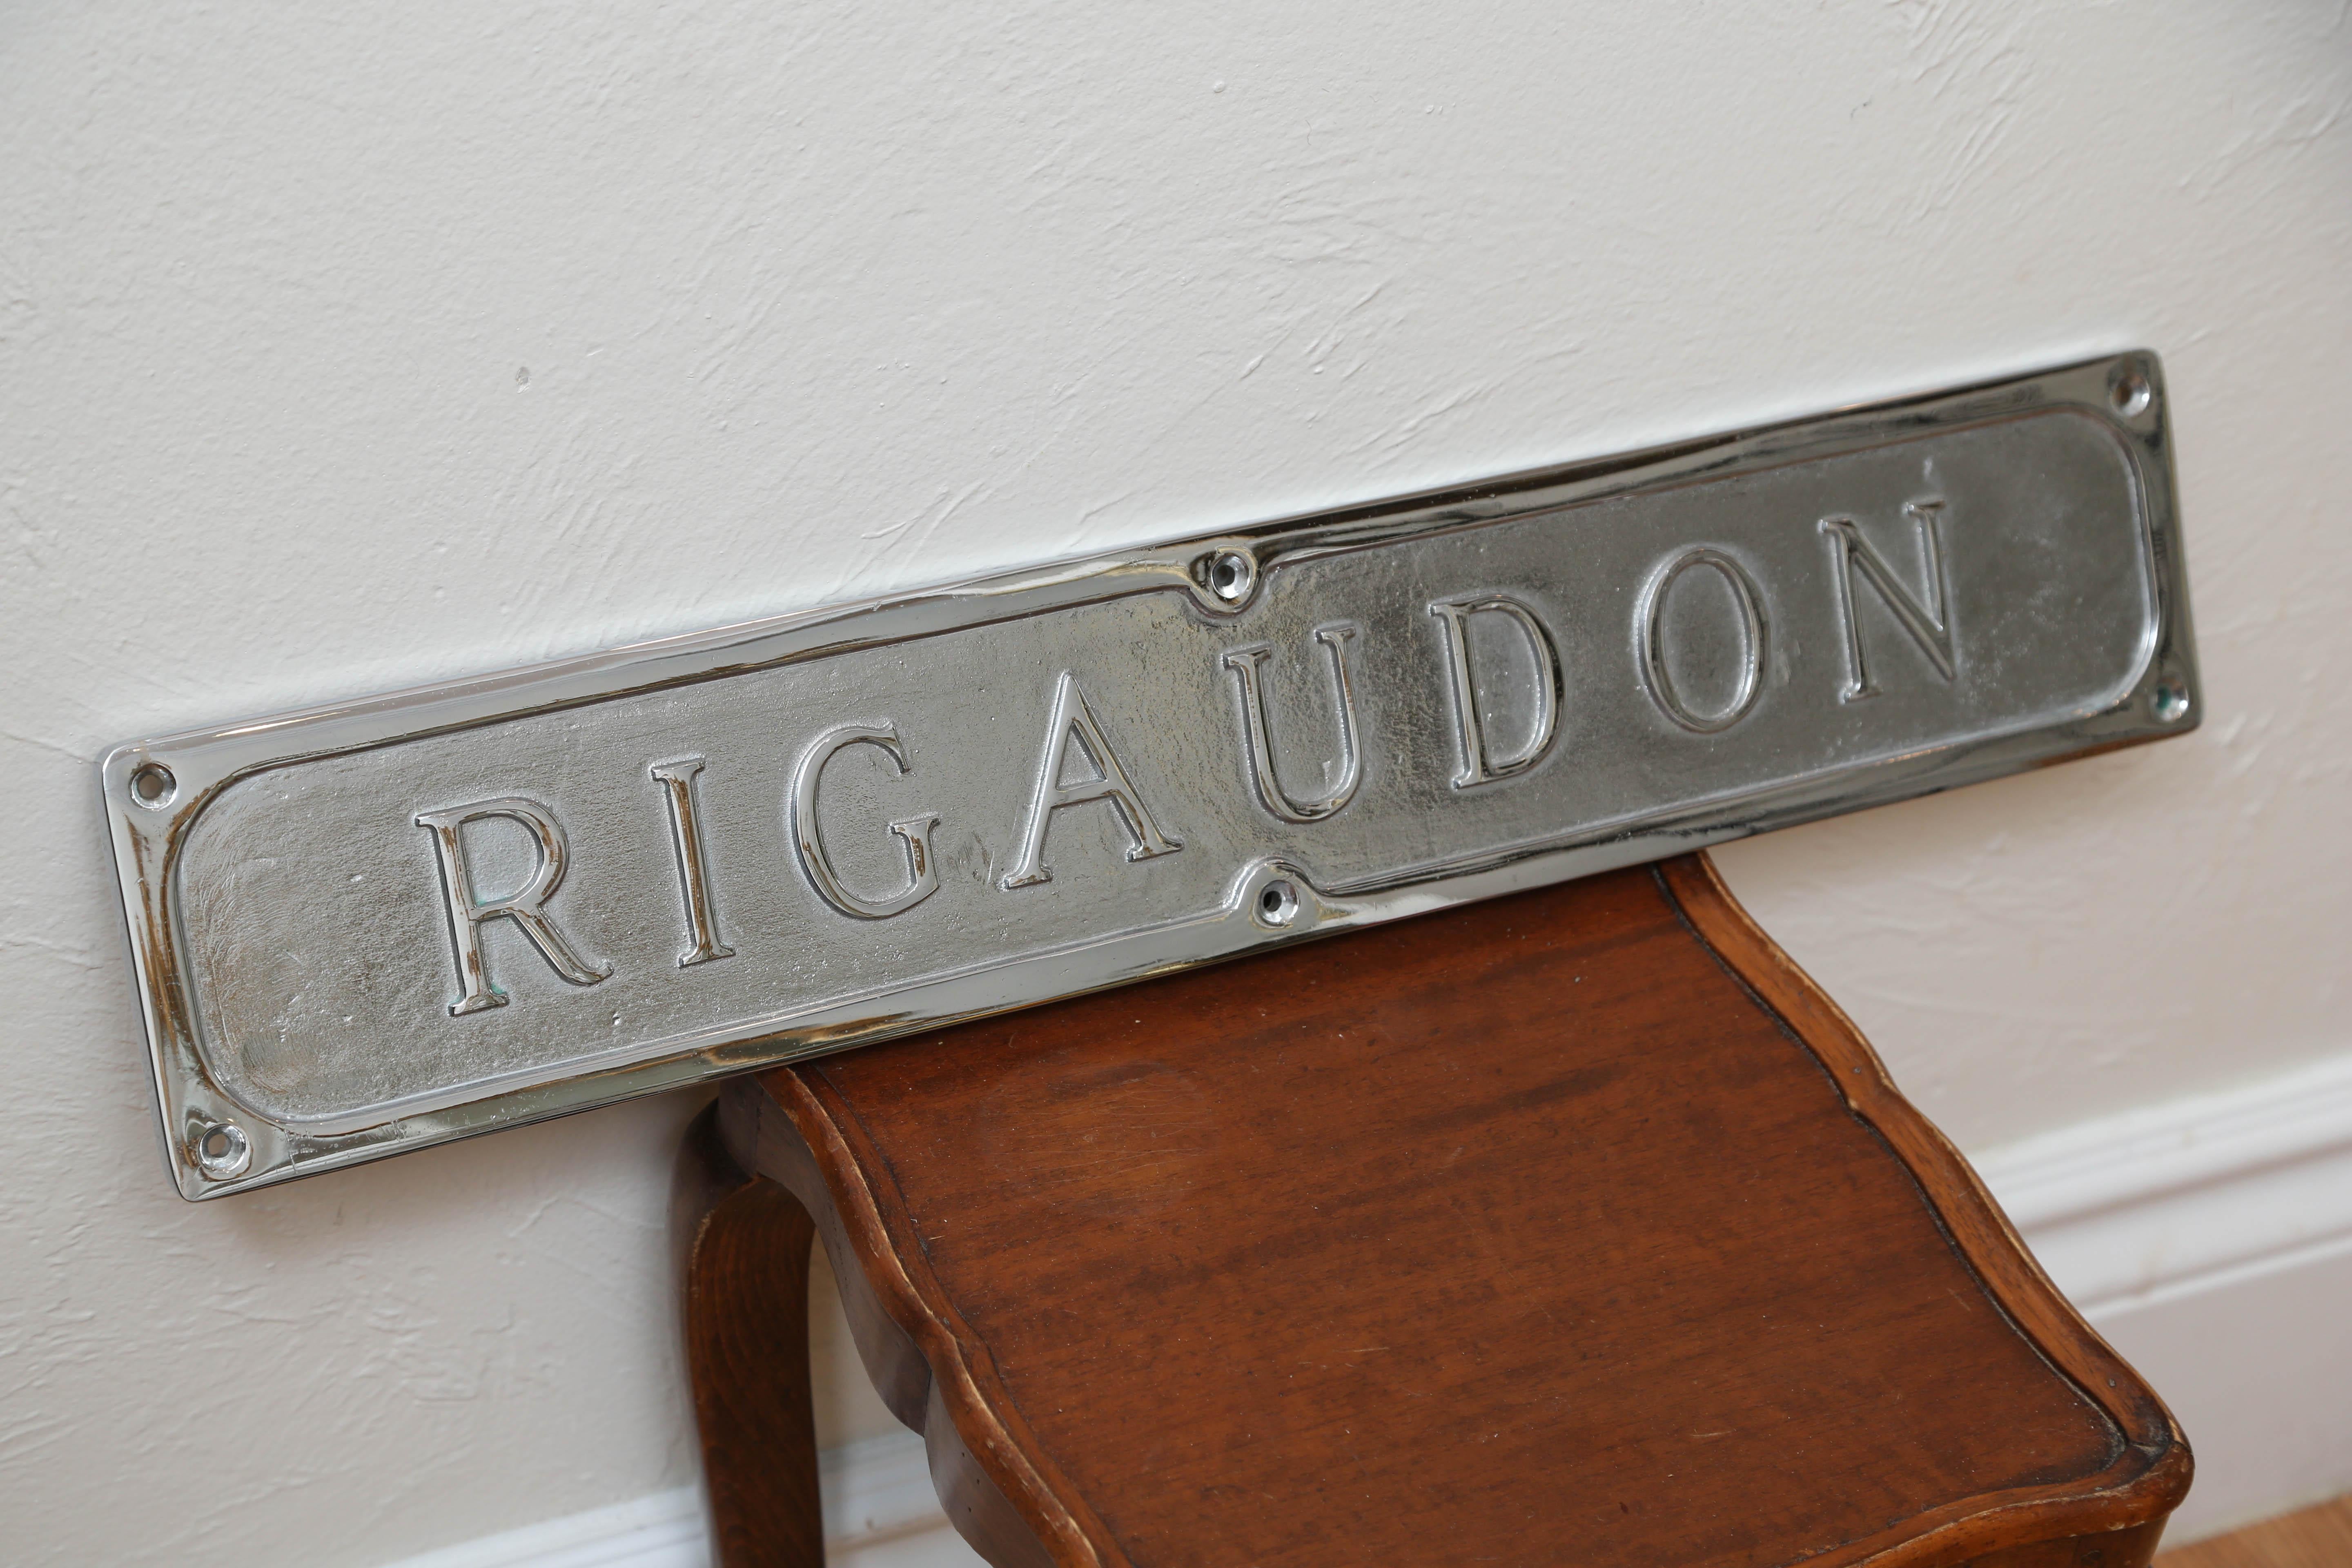 Rigaudon plated sign which means lively dance. Comes from the French, 17th century Baroque folk dance.